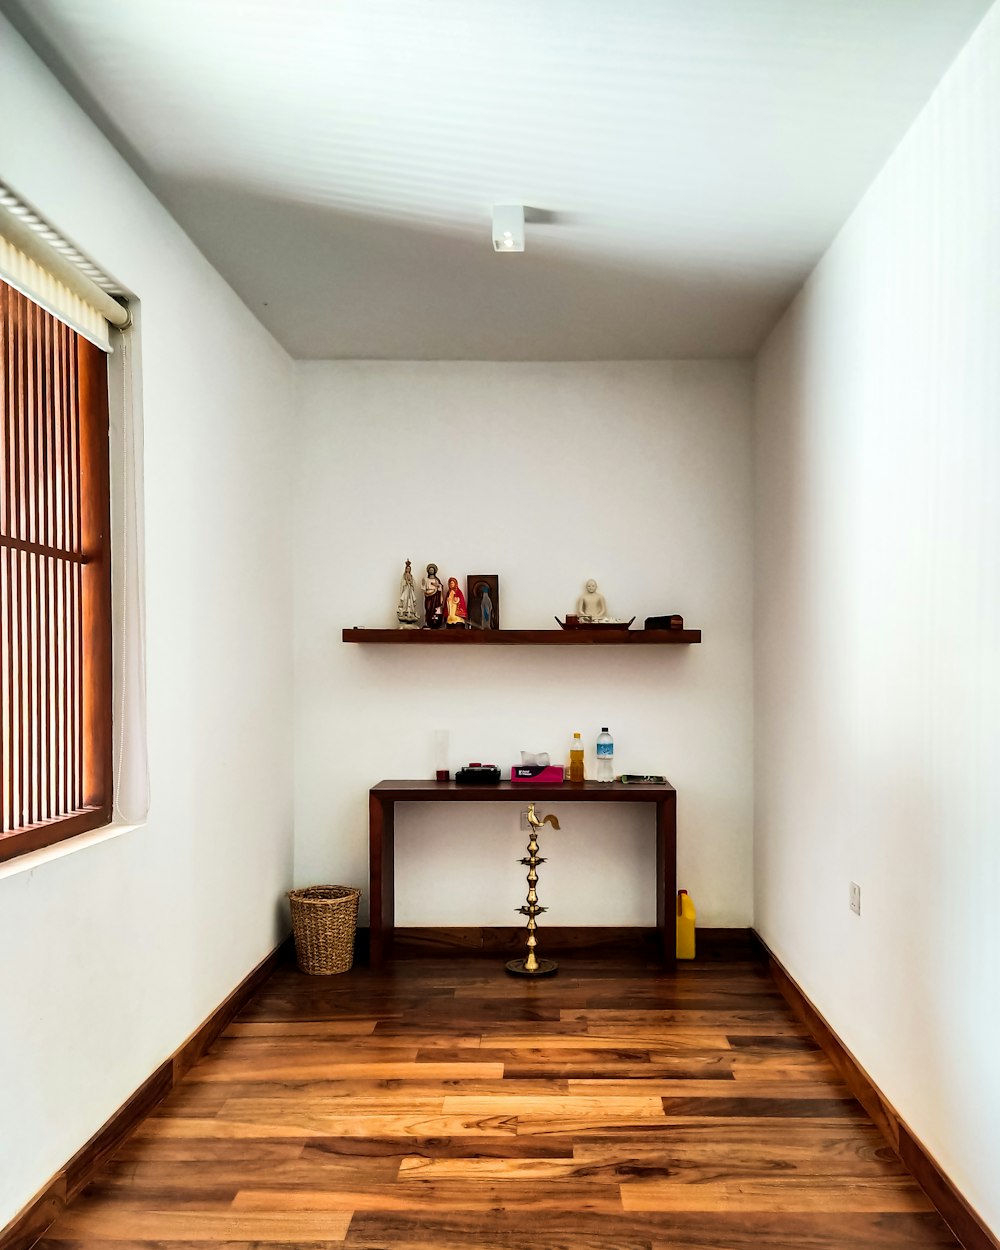 a room with a wooden floor and a shelf on the wall